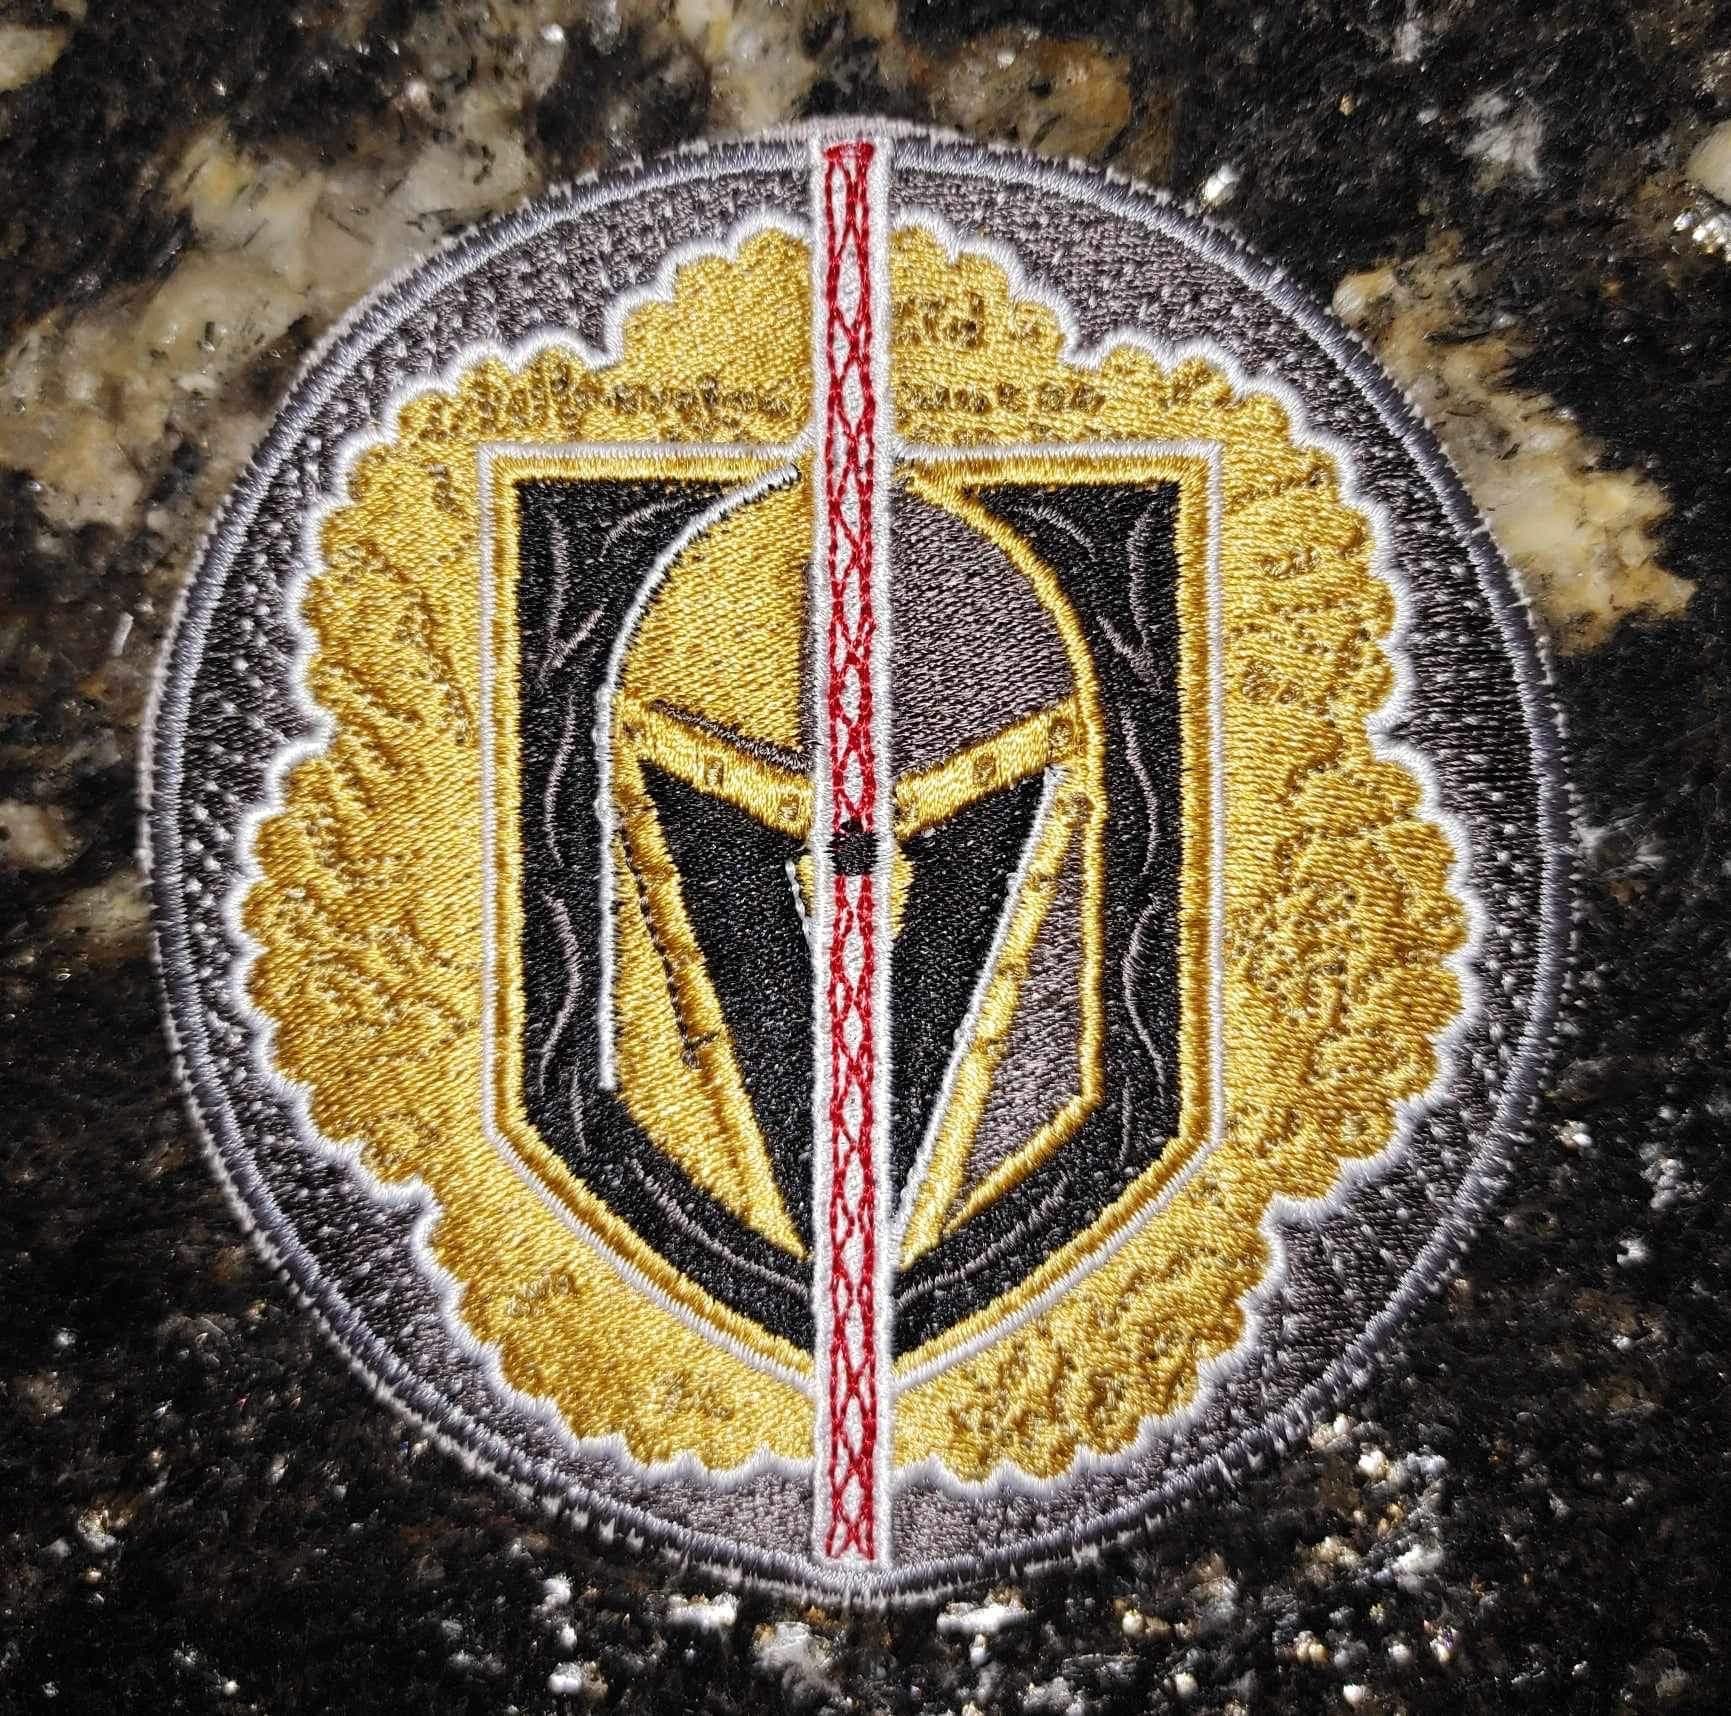 Vegas Golden Knights 2023 Stanley Cup Champions 5 Inch Die Cut Decal Sticker,  Flat Vinyl, Clear Adhesive Backing 